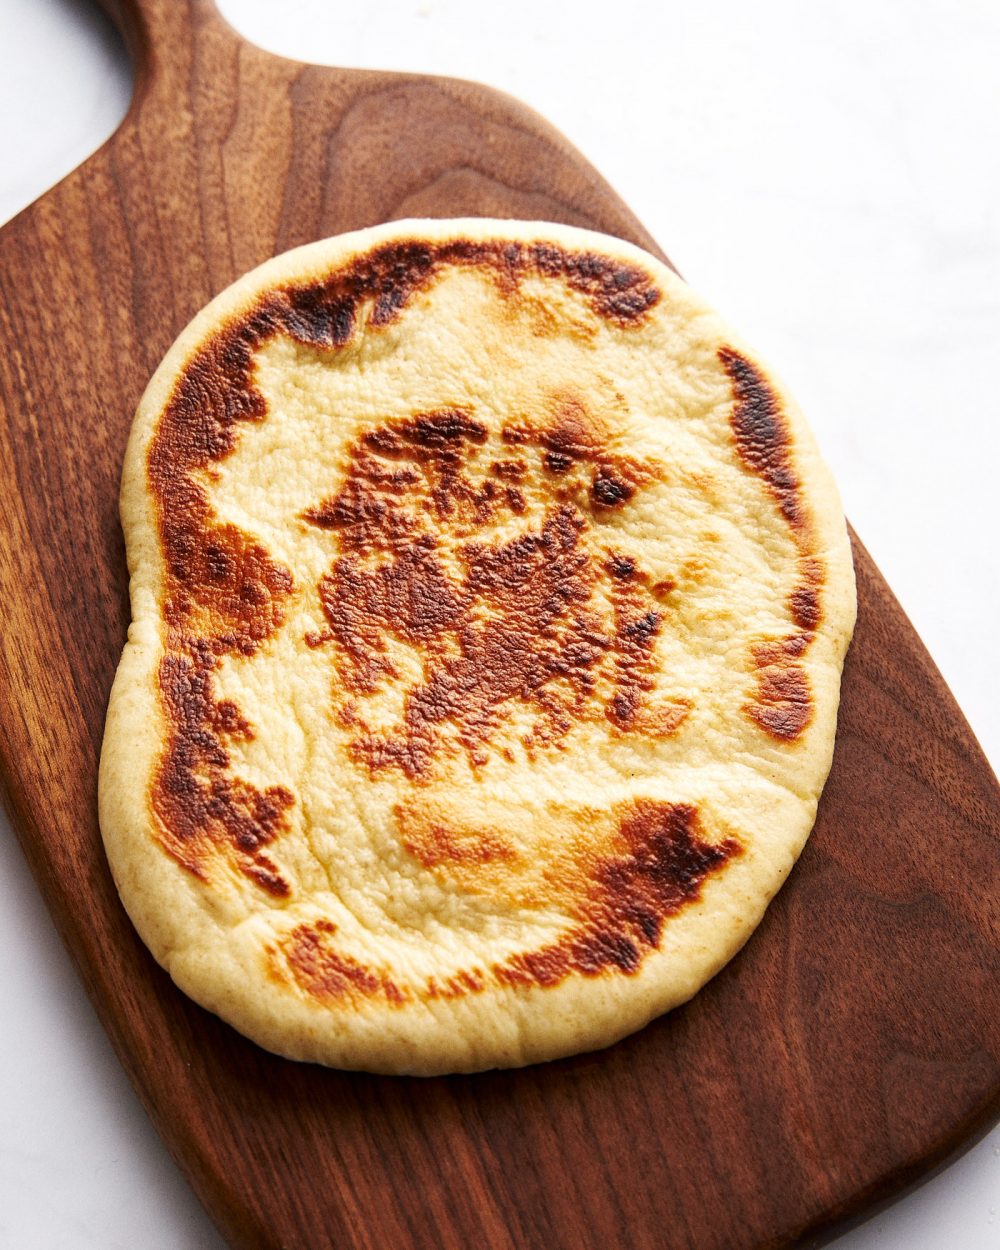 Bazlama - Soft Turkish tortillas with a "pocket" in the pan step by step recipe with photo